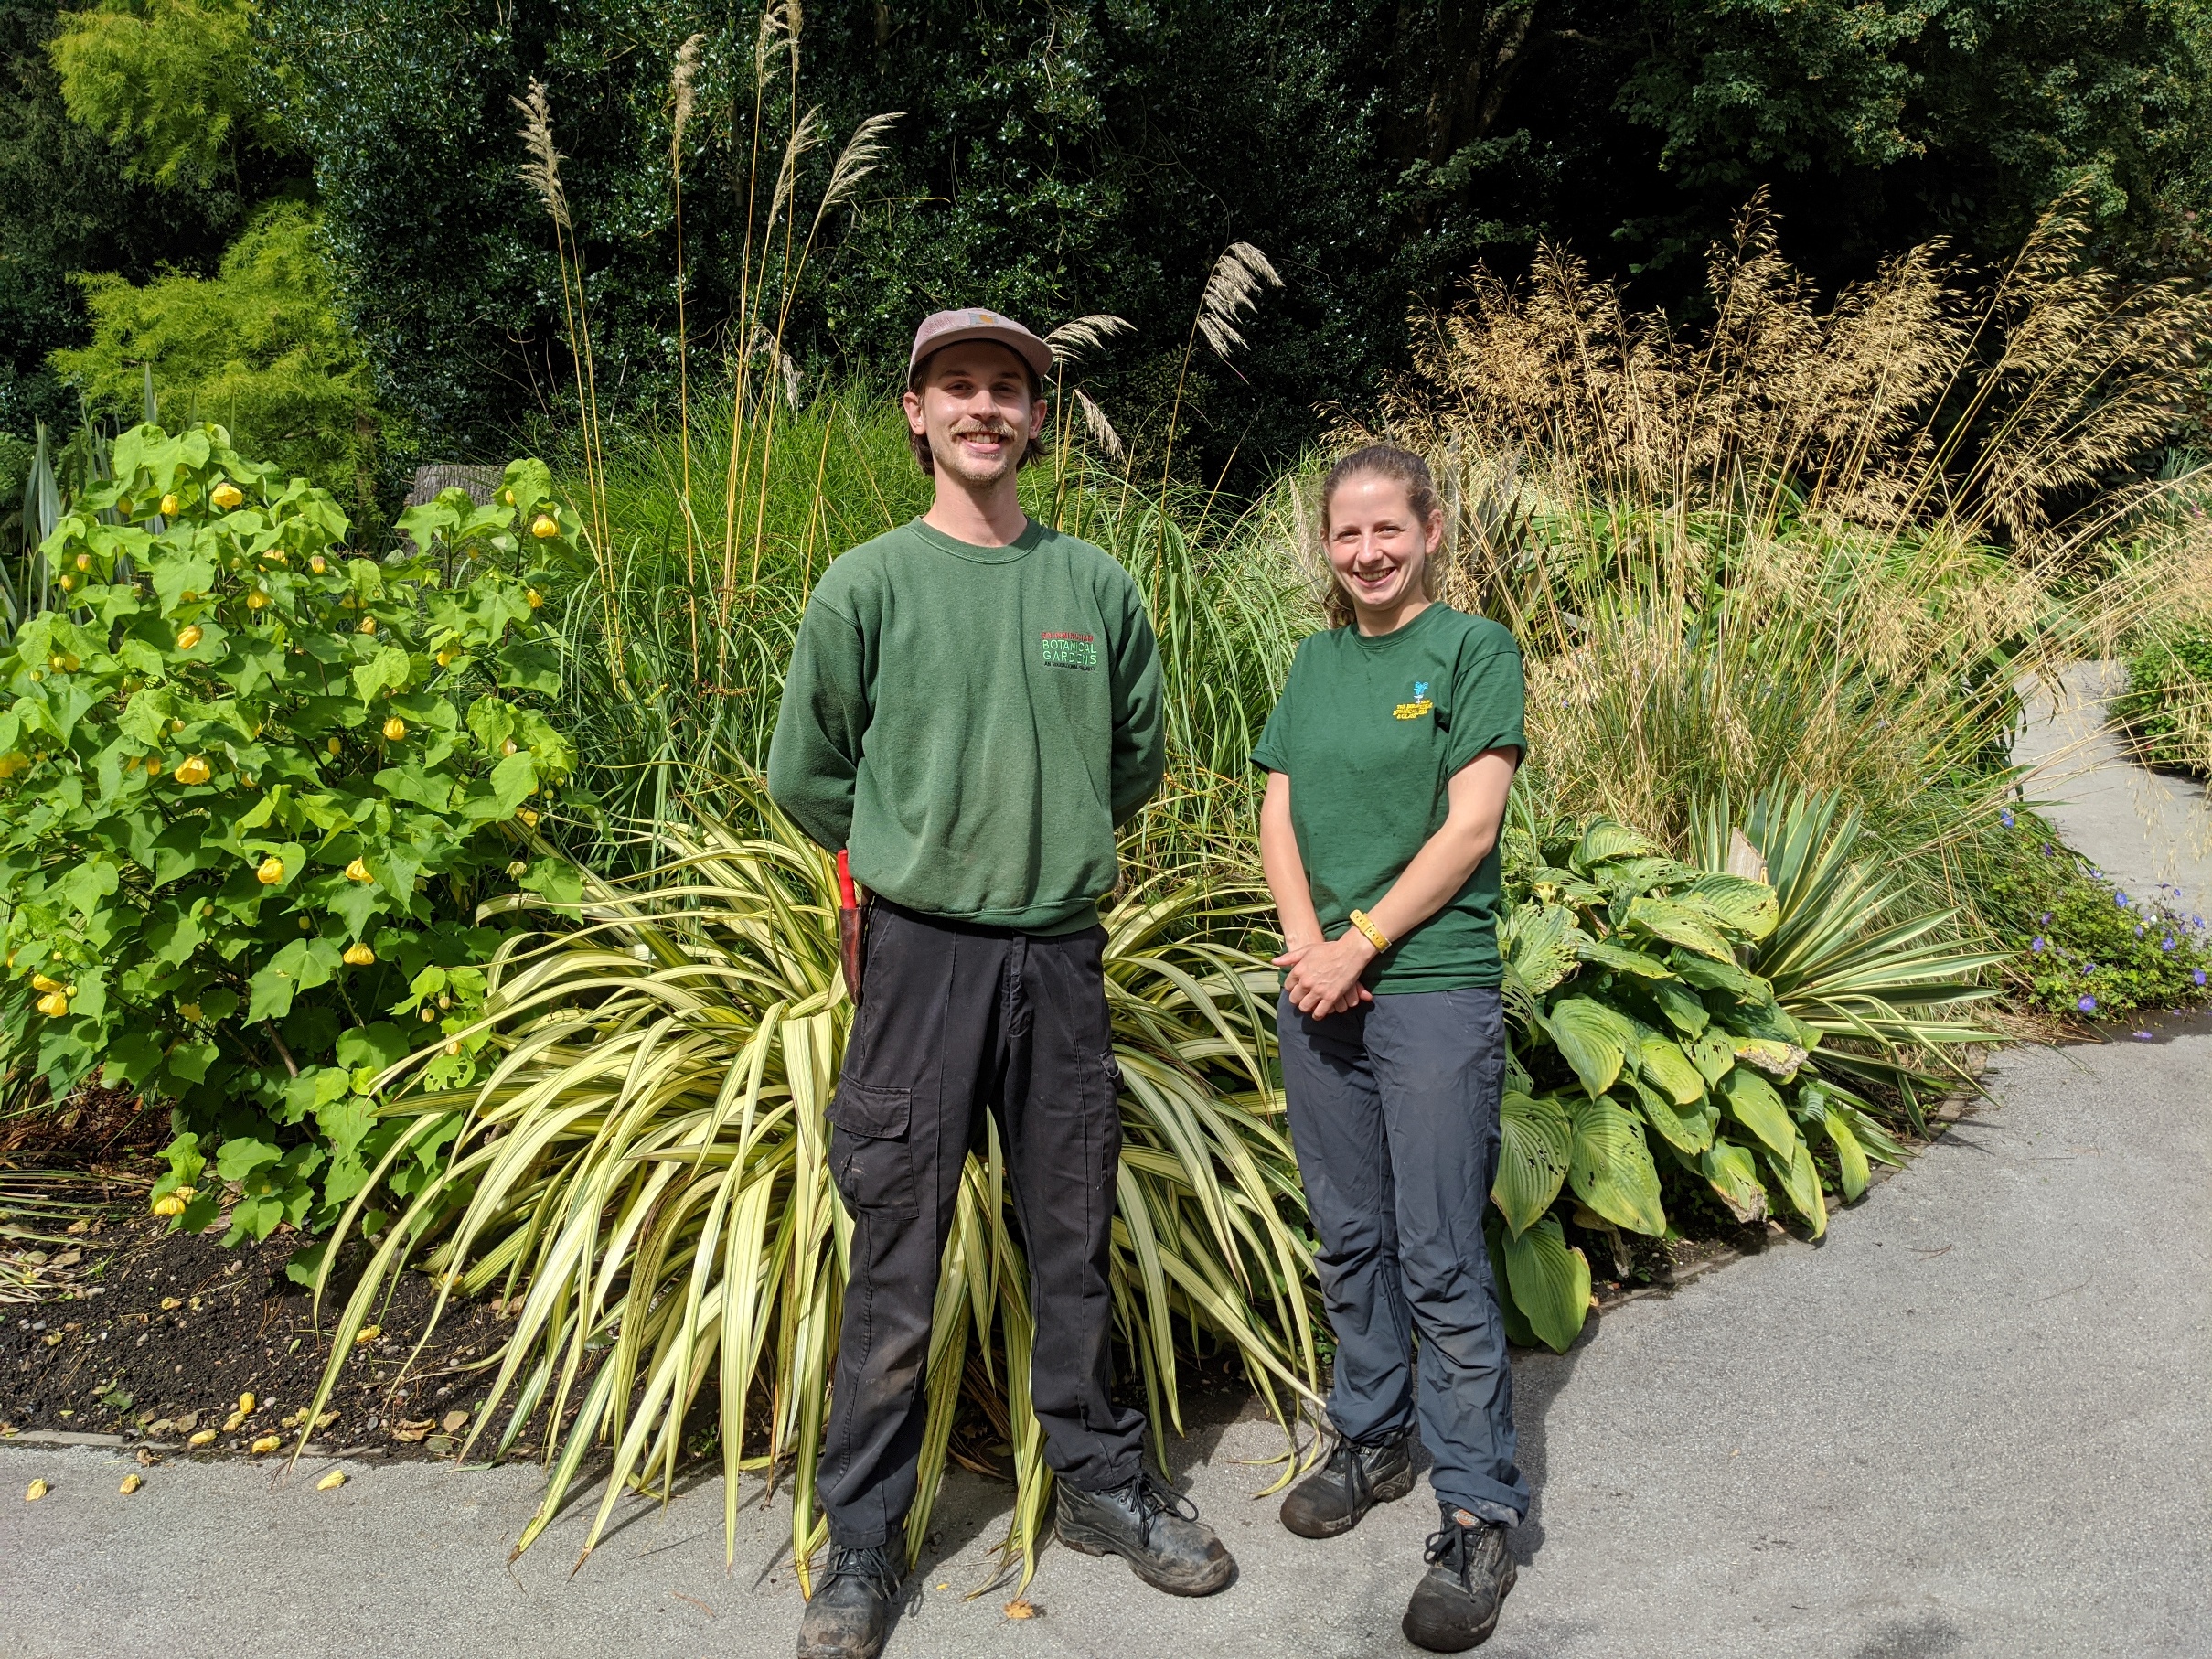 Two trainee horticulturalists join Birmingham Botanical Gardens